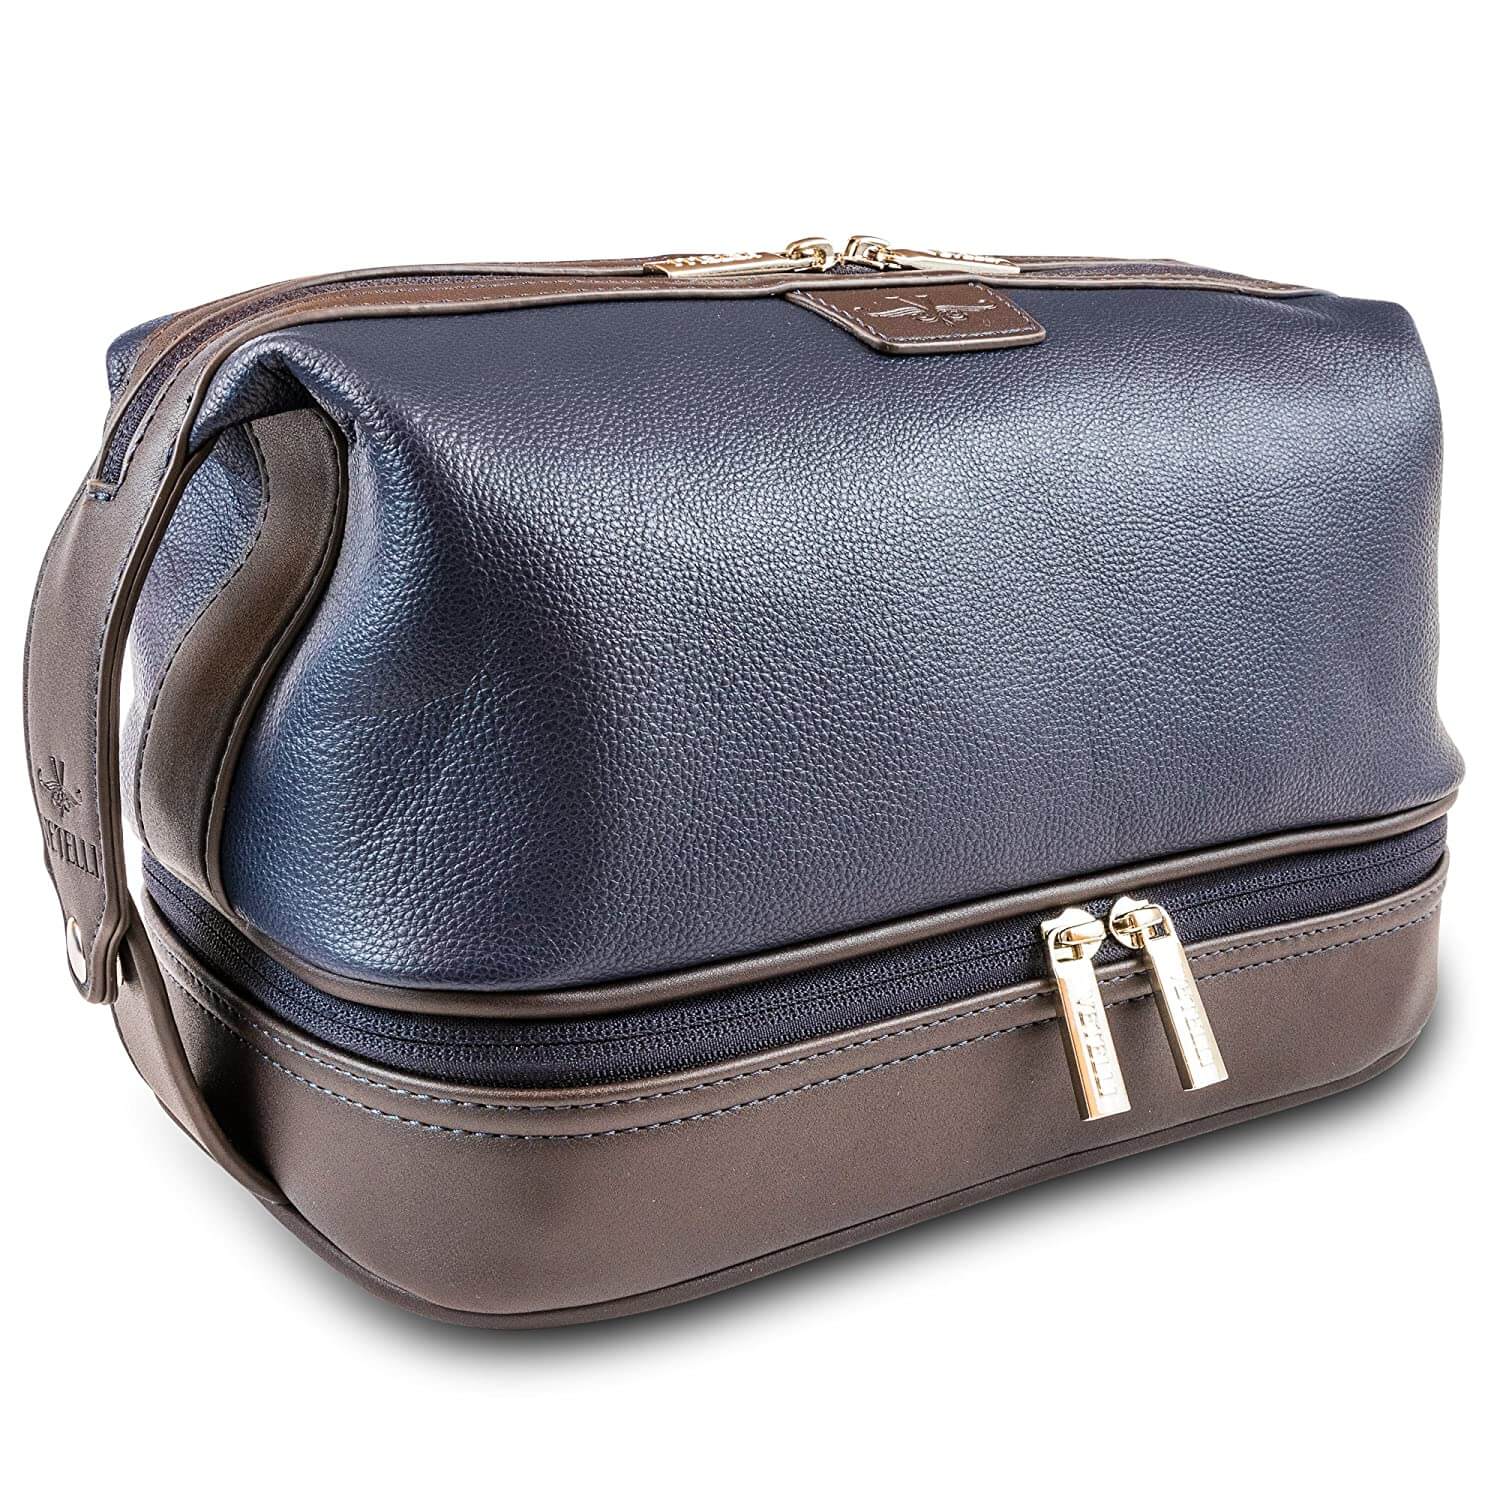 Mens Leather Travel Toiletry & Shave Bag Vetelli Leo Great Mens Gift Size Large